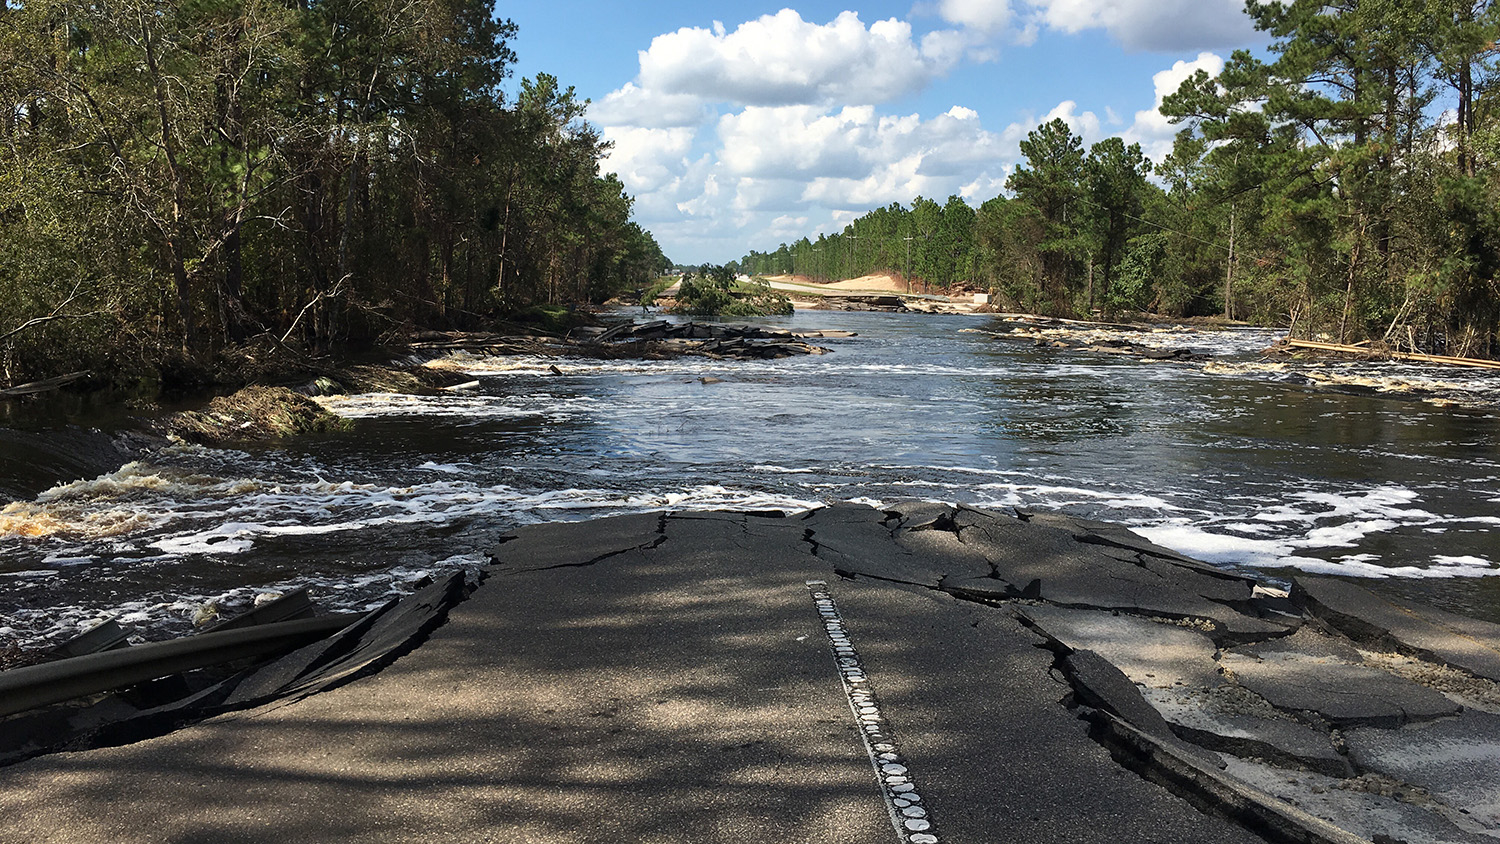 A cracked highway disappears into flood waters.